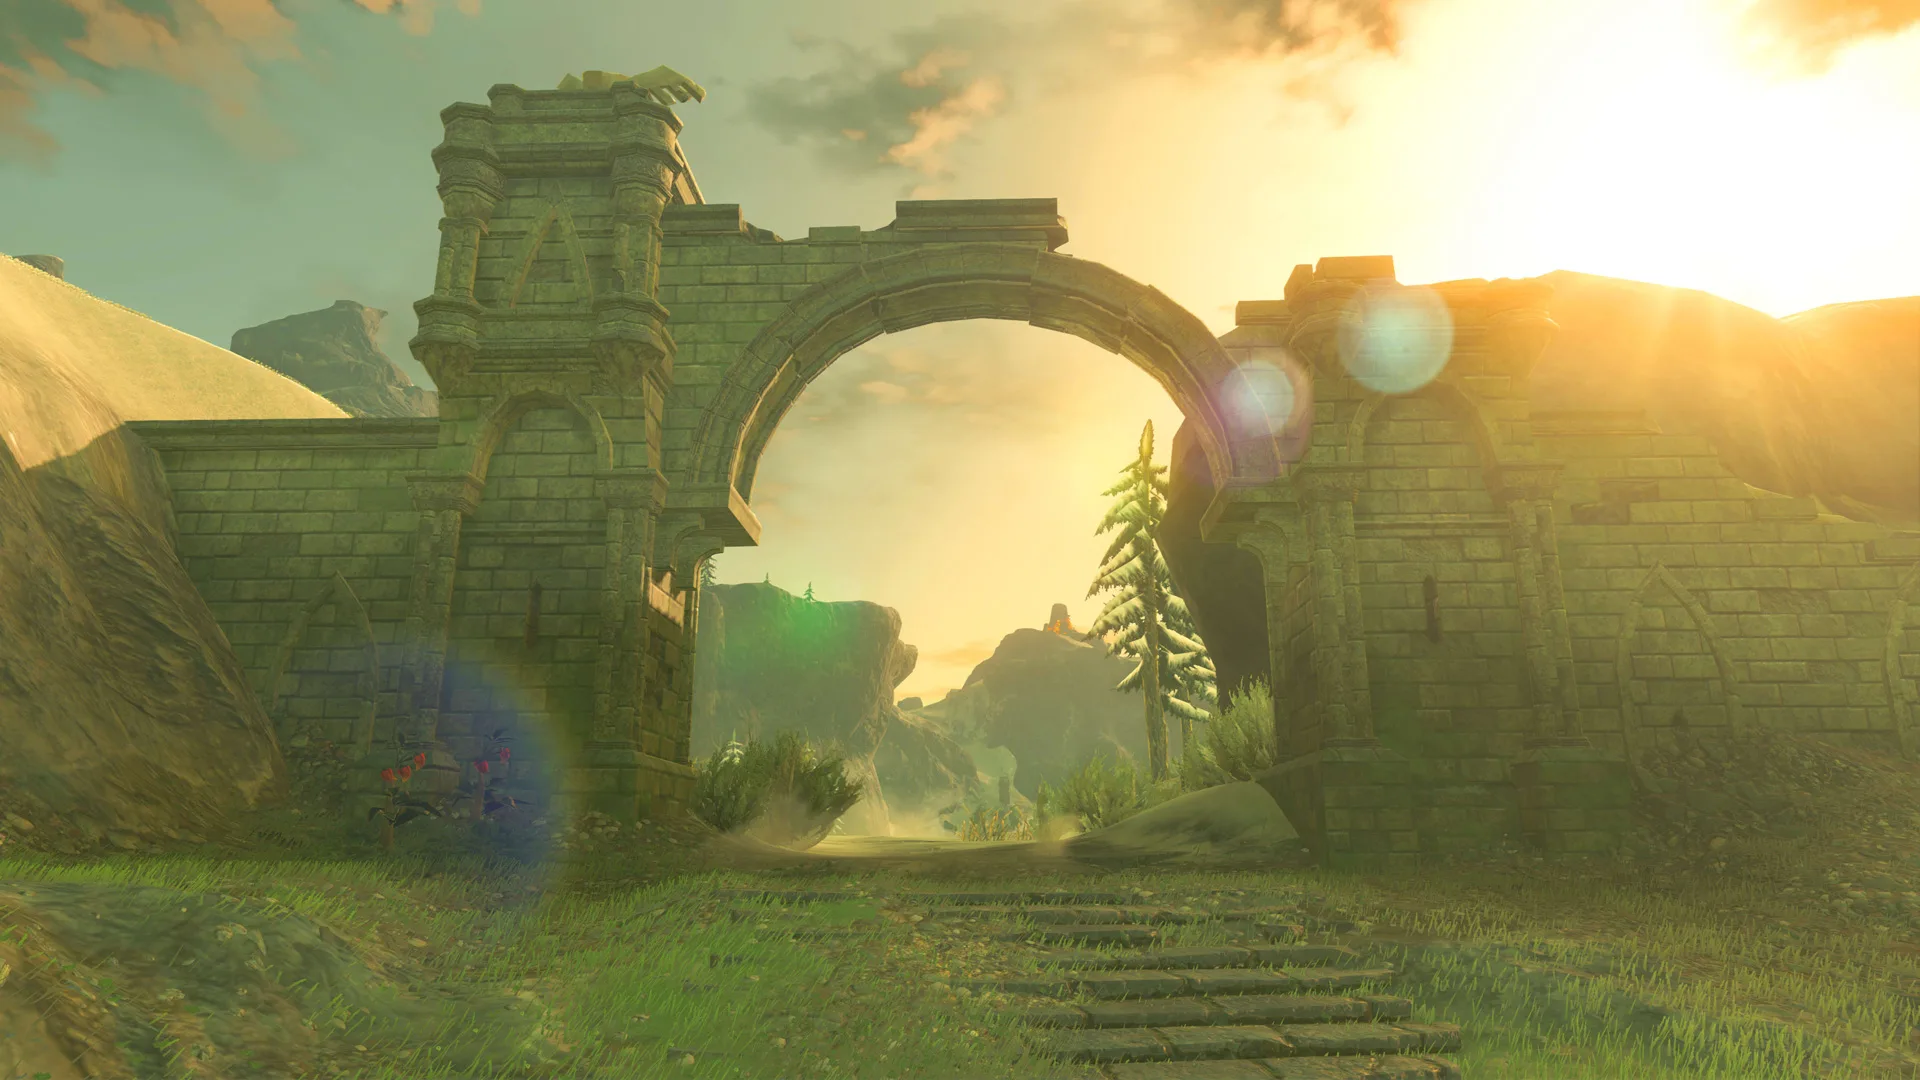 A scene from Zelda Breath of the Wild showing a bridge at sunset with trees in the background.